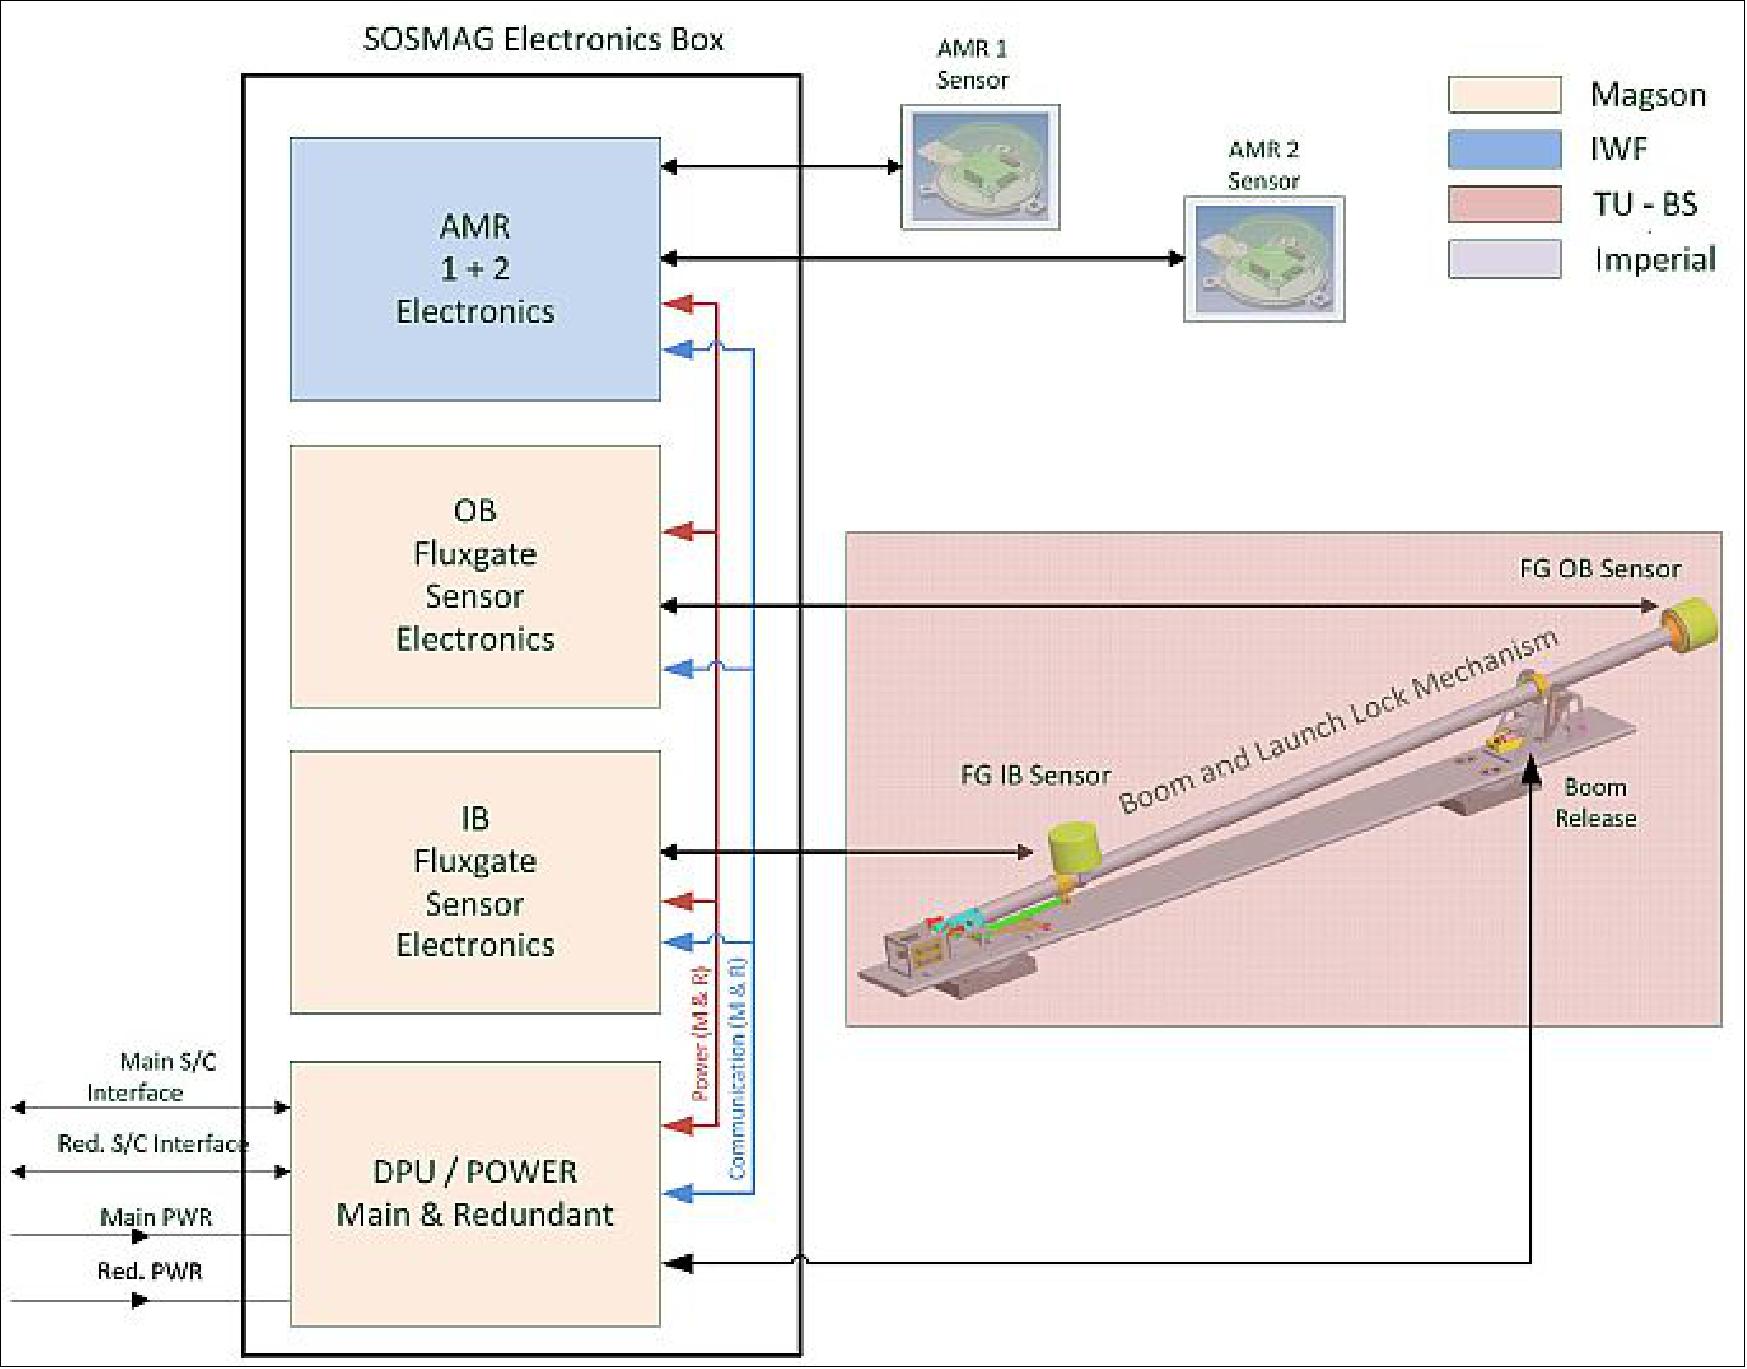 Figure 23: Schematic view of the SOSMAG architecture (image credit: SOSMAG Team)